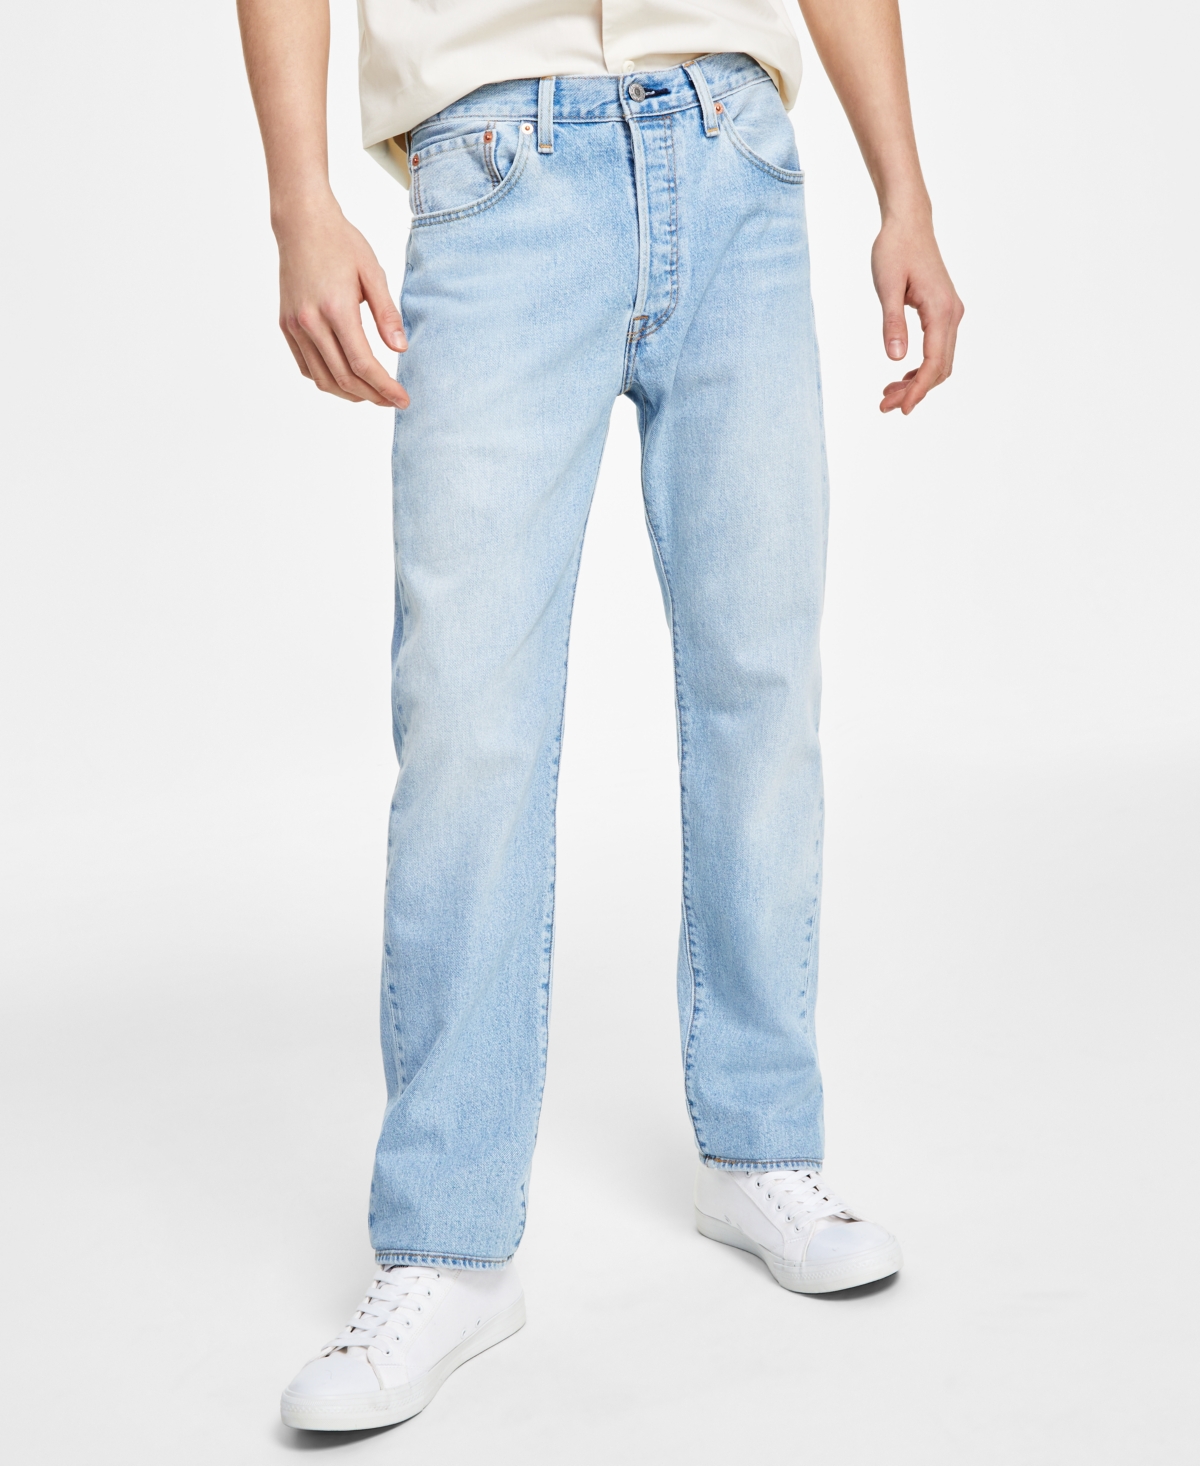 Levi's Men's 501 Original Fit Button Fly Stretch Jeans In Brooklyn Steel